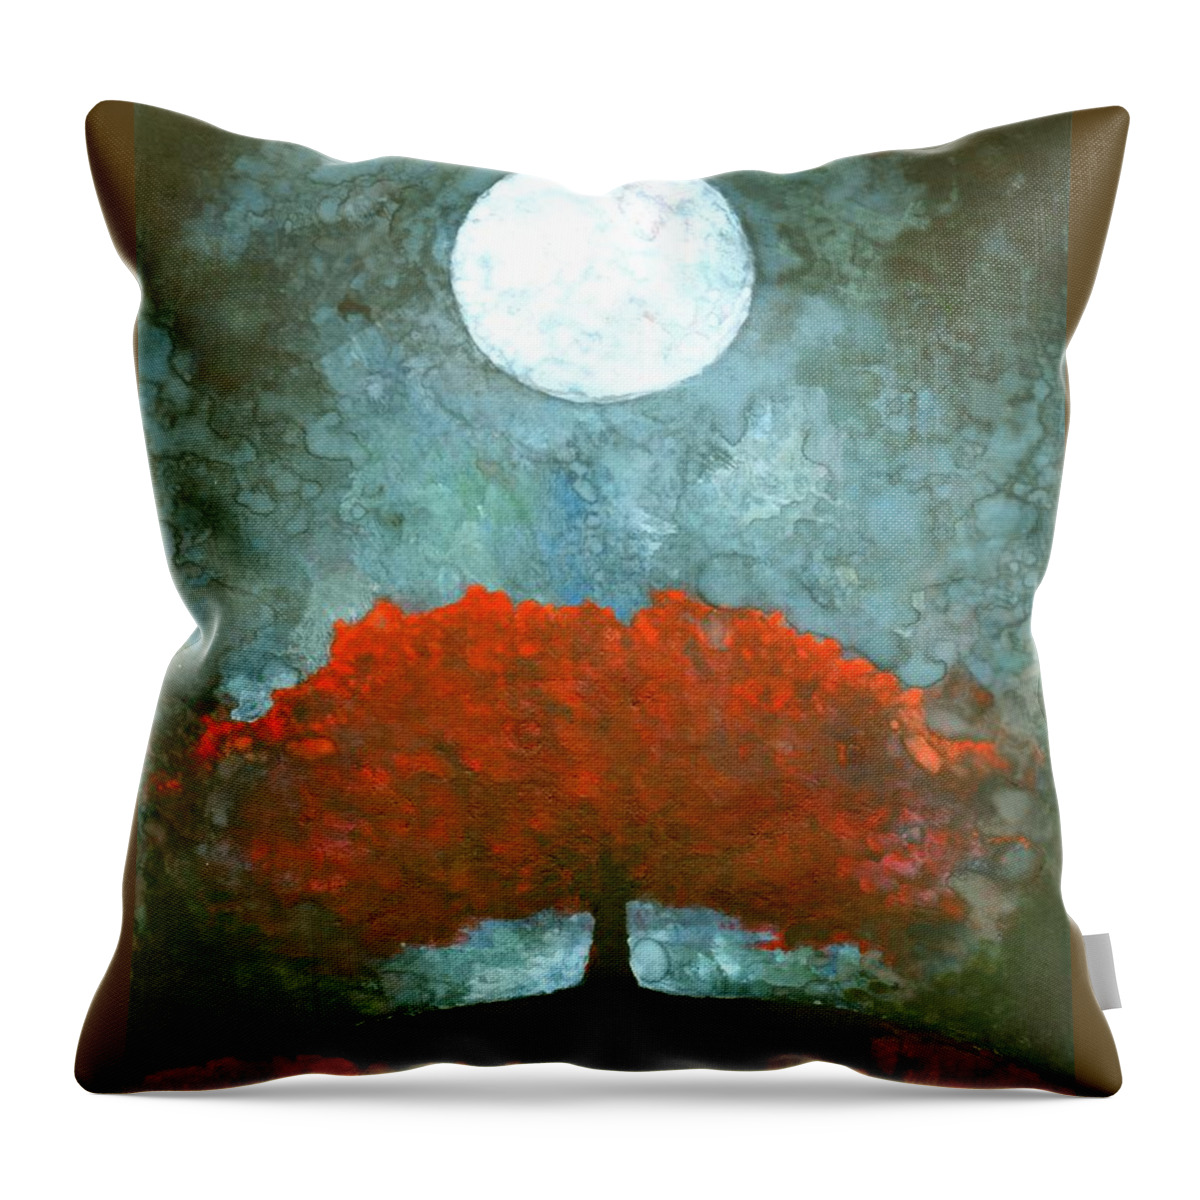 Colour Throw Pillow featuring the painting For Ever by Wojtek Kowalski